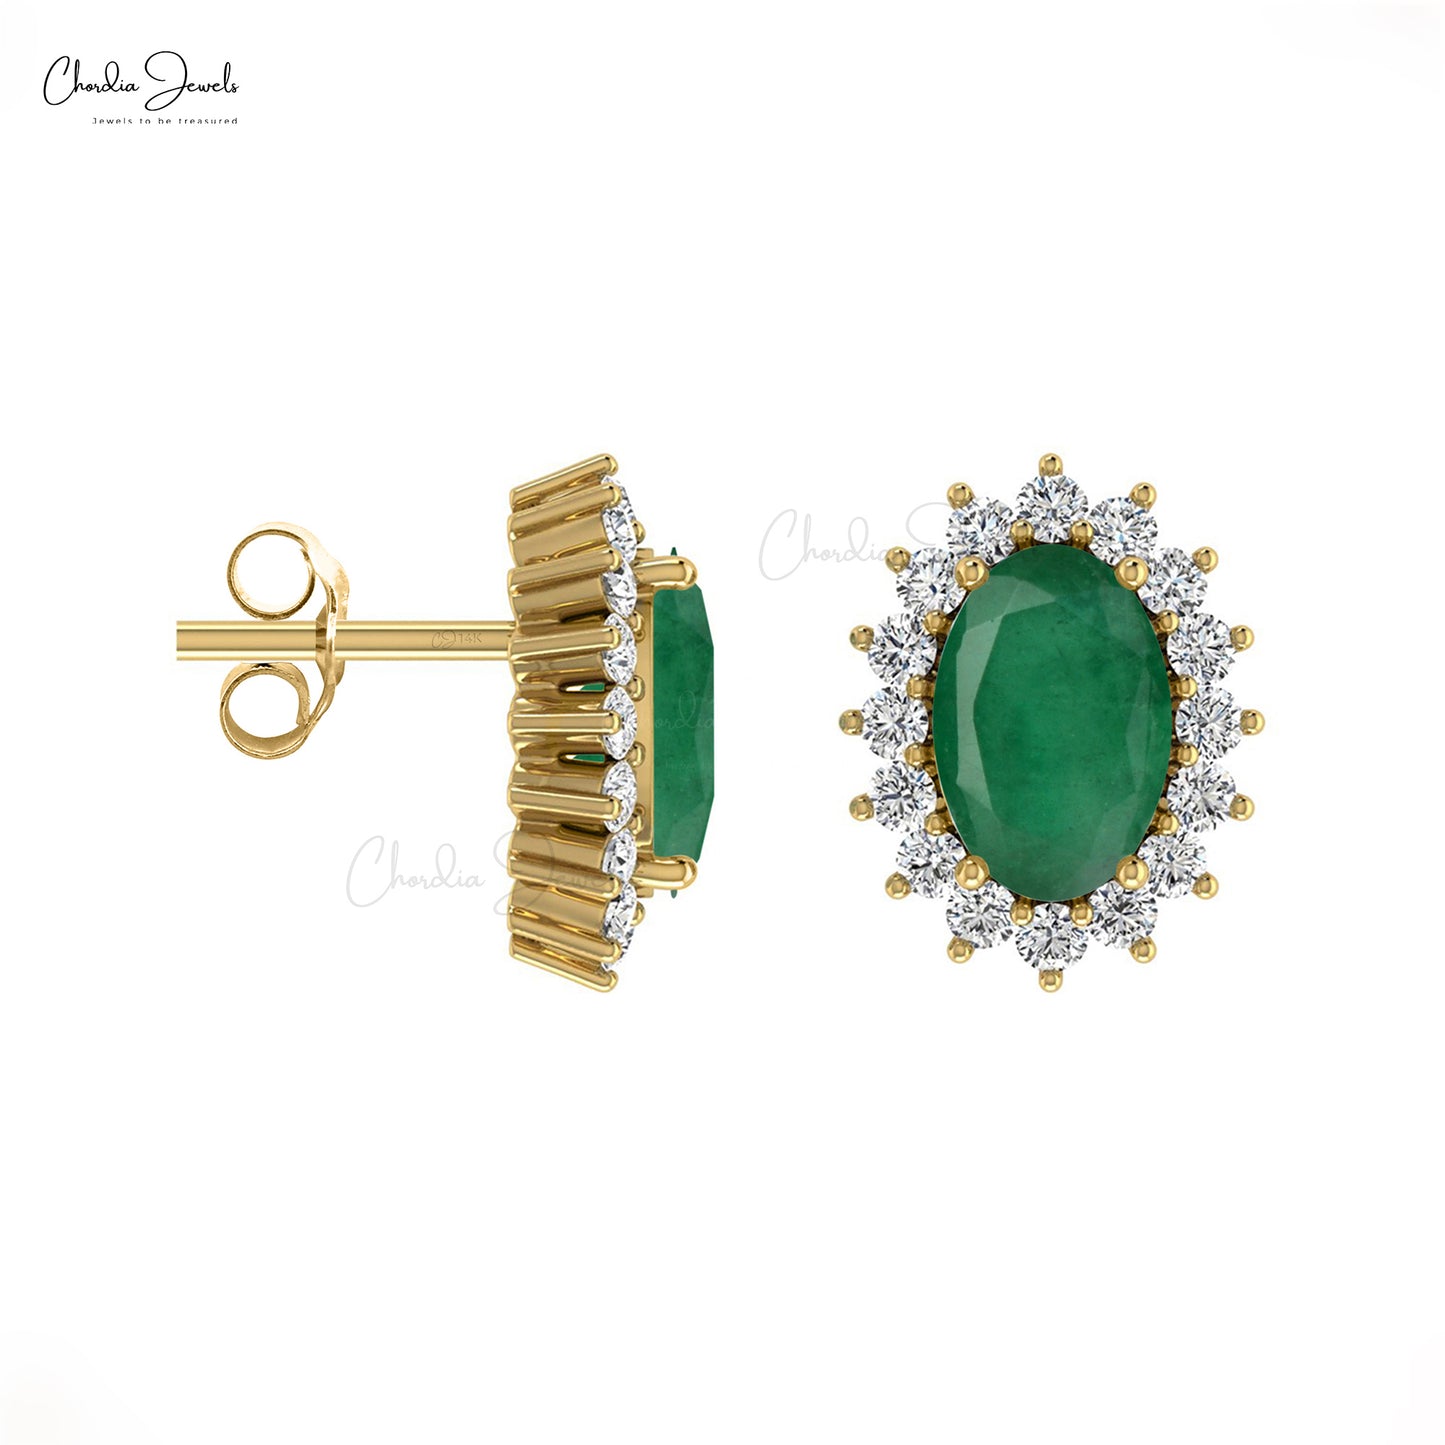 Adorn yourself in the epitome of emerald stud earrings.